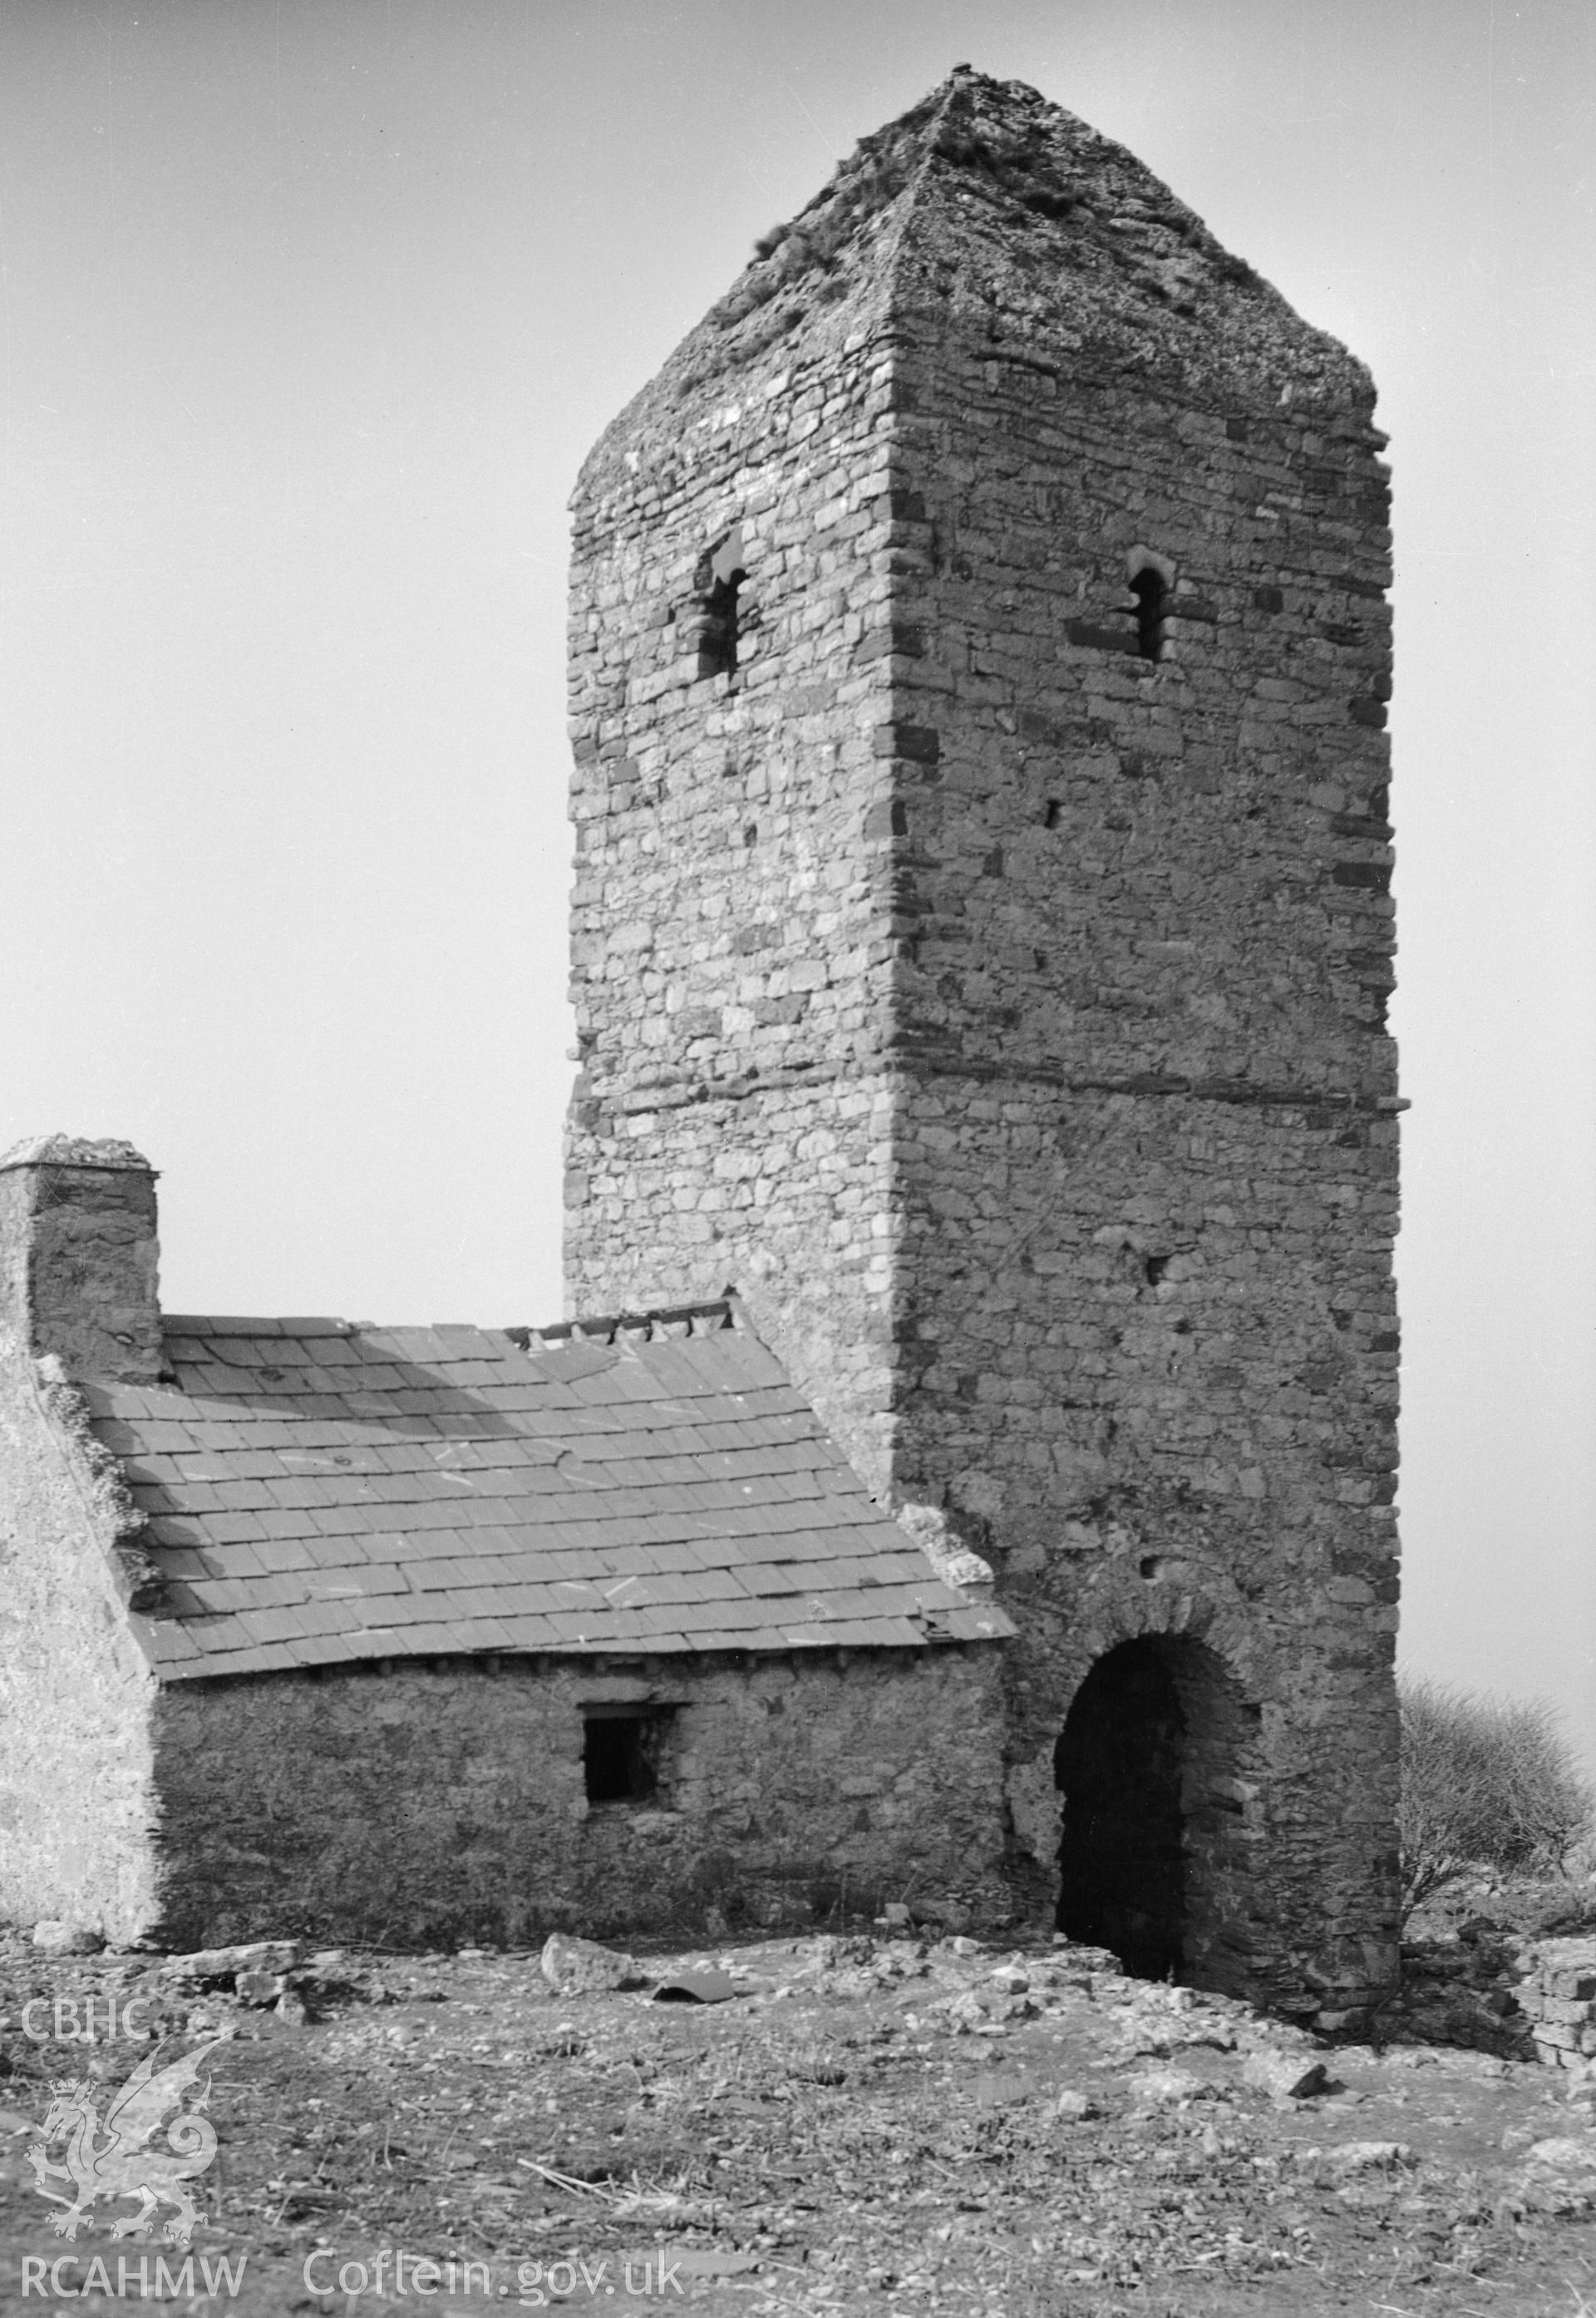 View of tower